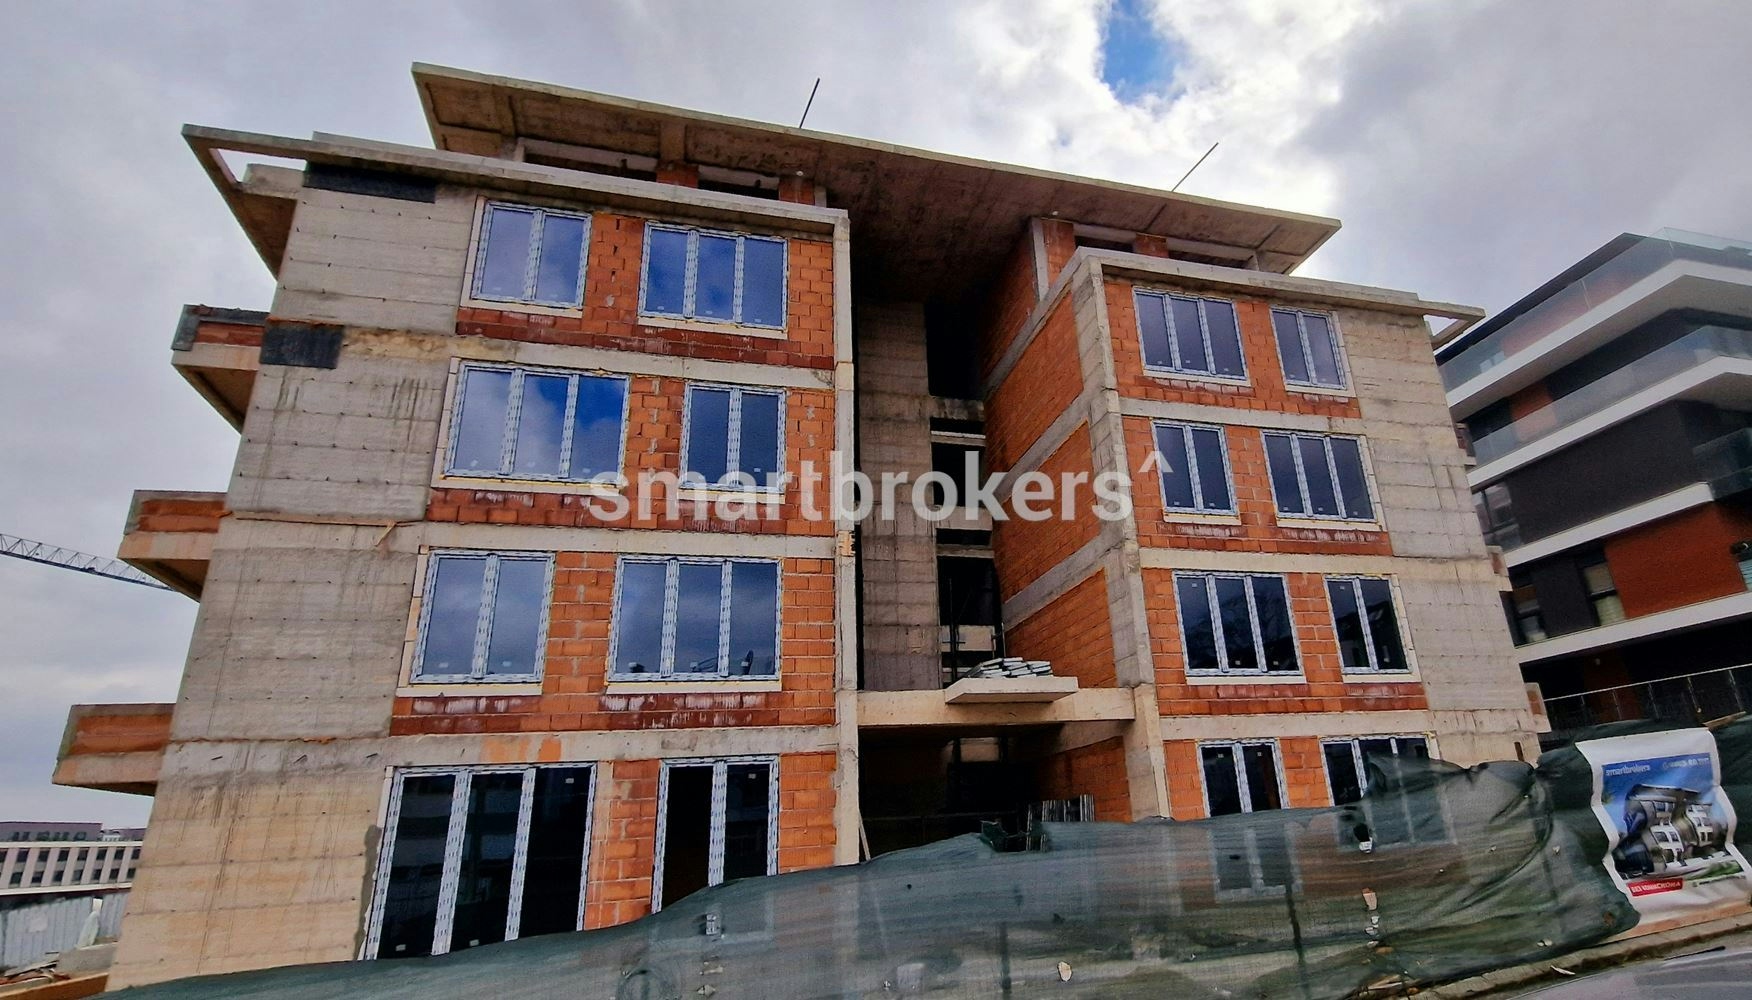 Spacious south-facing ground floor apartment with 2 courtyard terraces and a huge living room